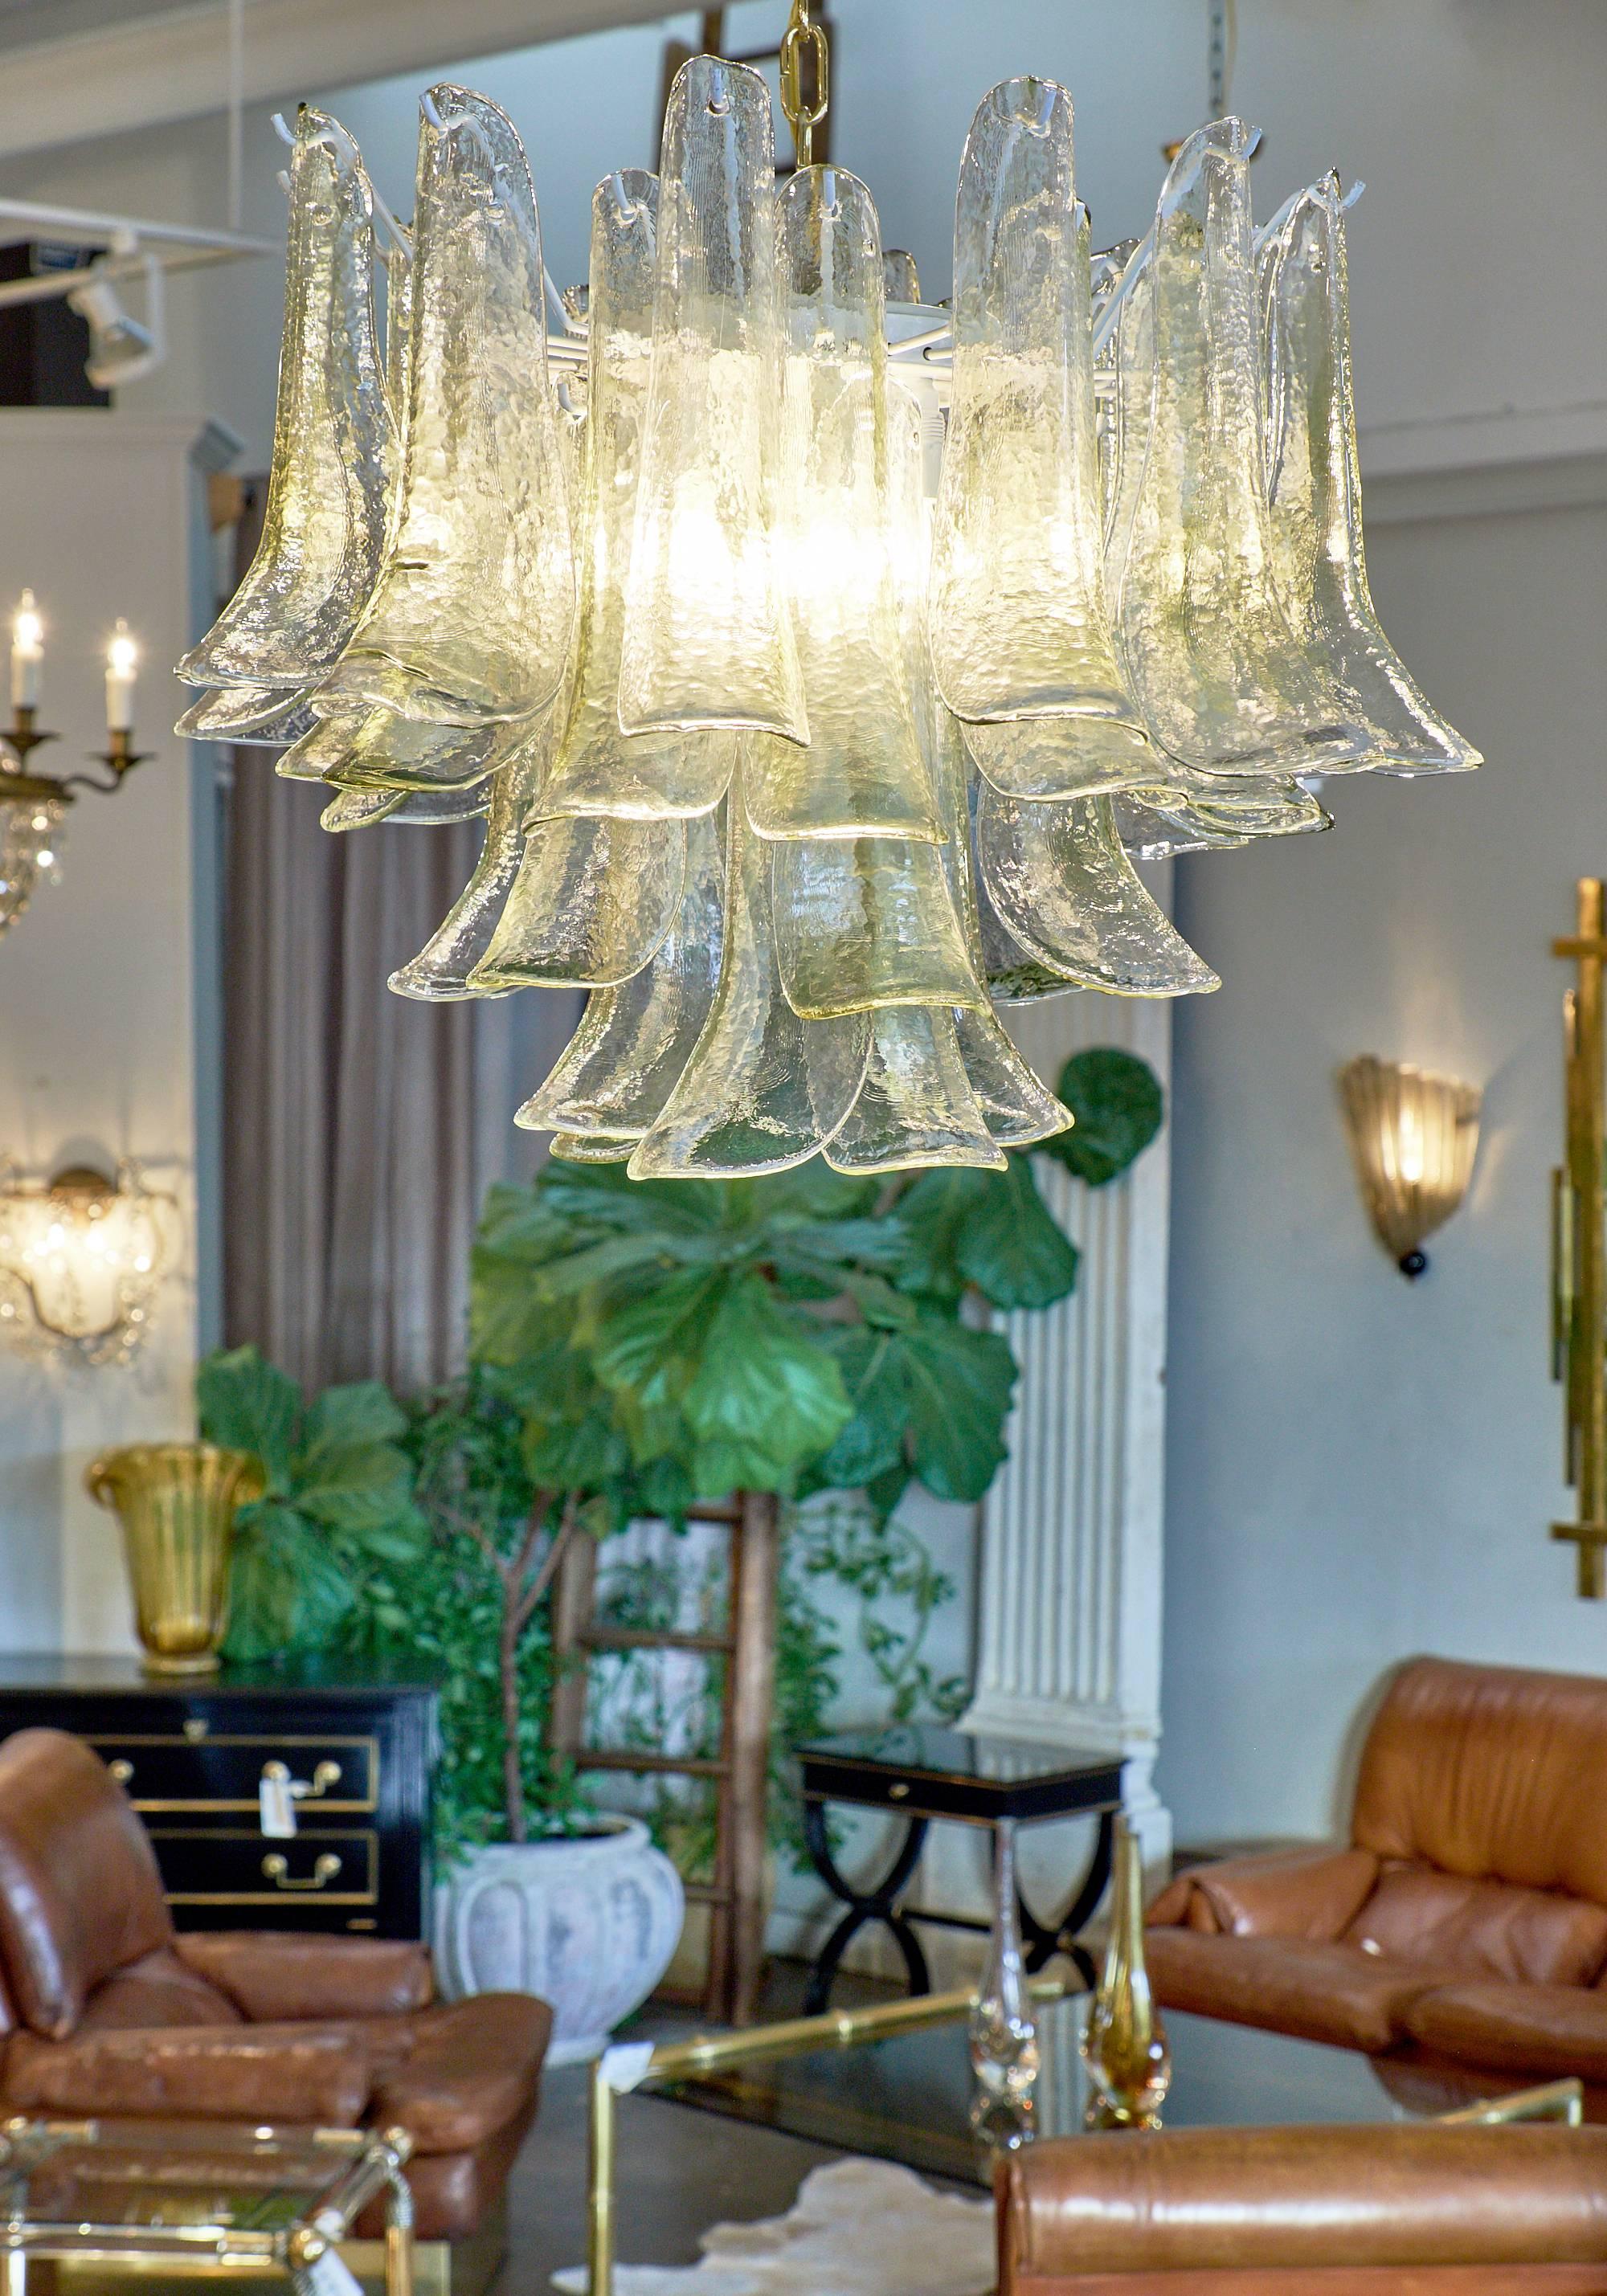 Clear Murano glass selle elements are layered to create a lovely feathered effect for this stunning, unique chandelier. The light comes through the glass for a beautiful, modern look. This wonderful chandelier is the perfect size for a dining room